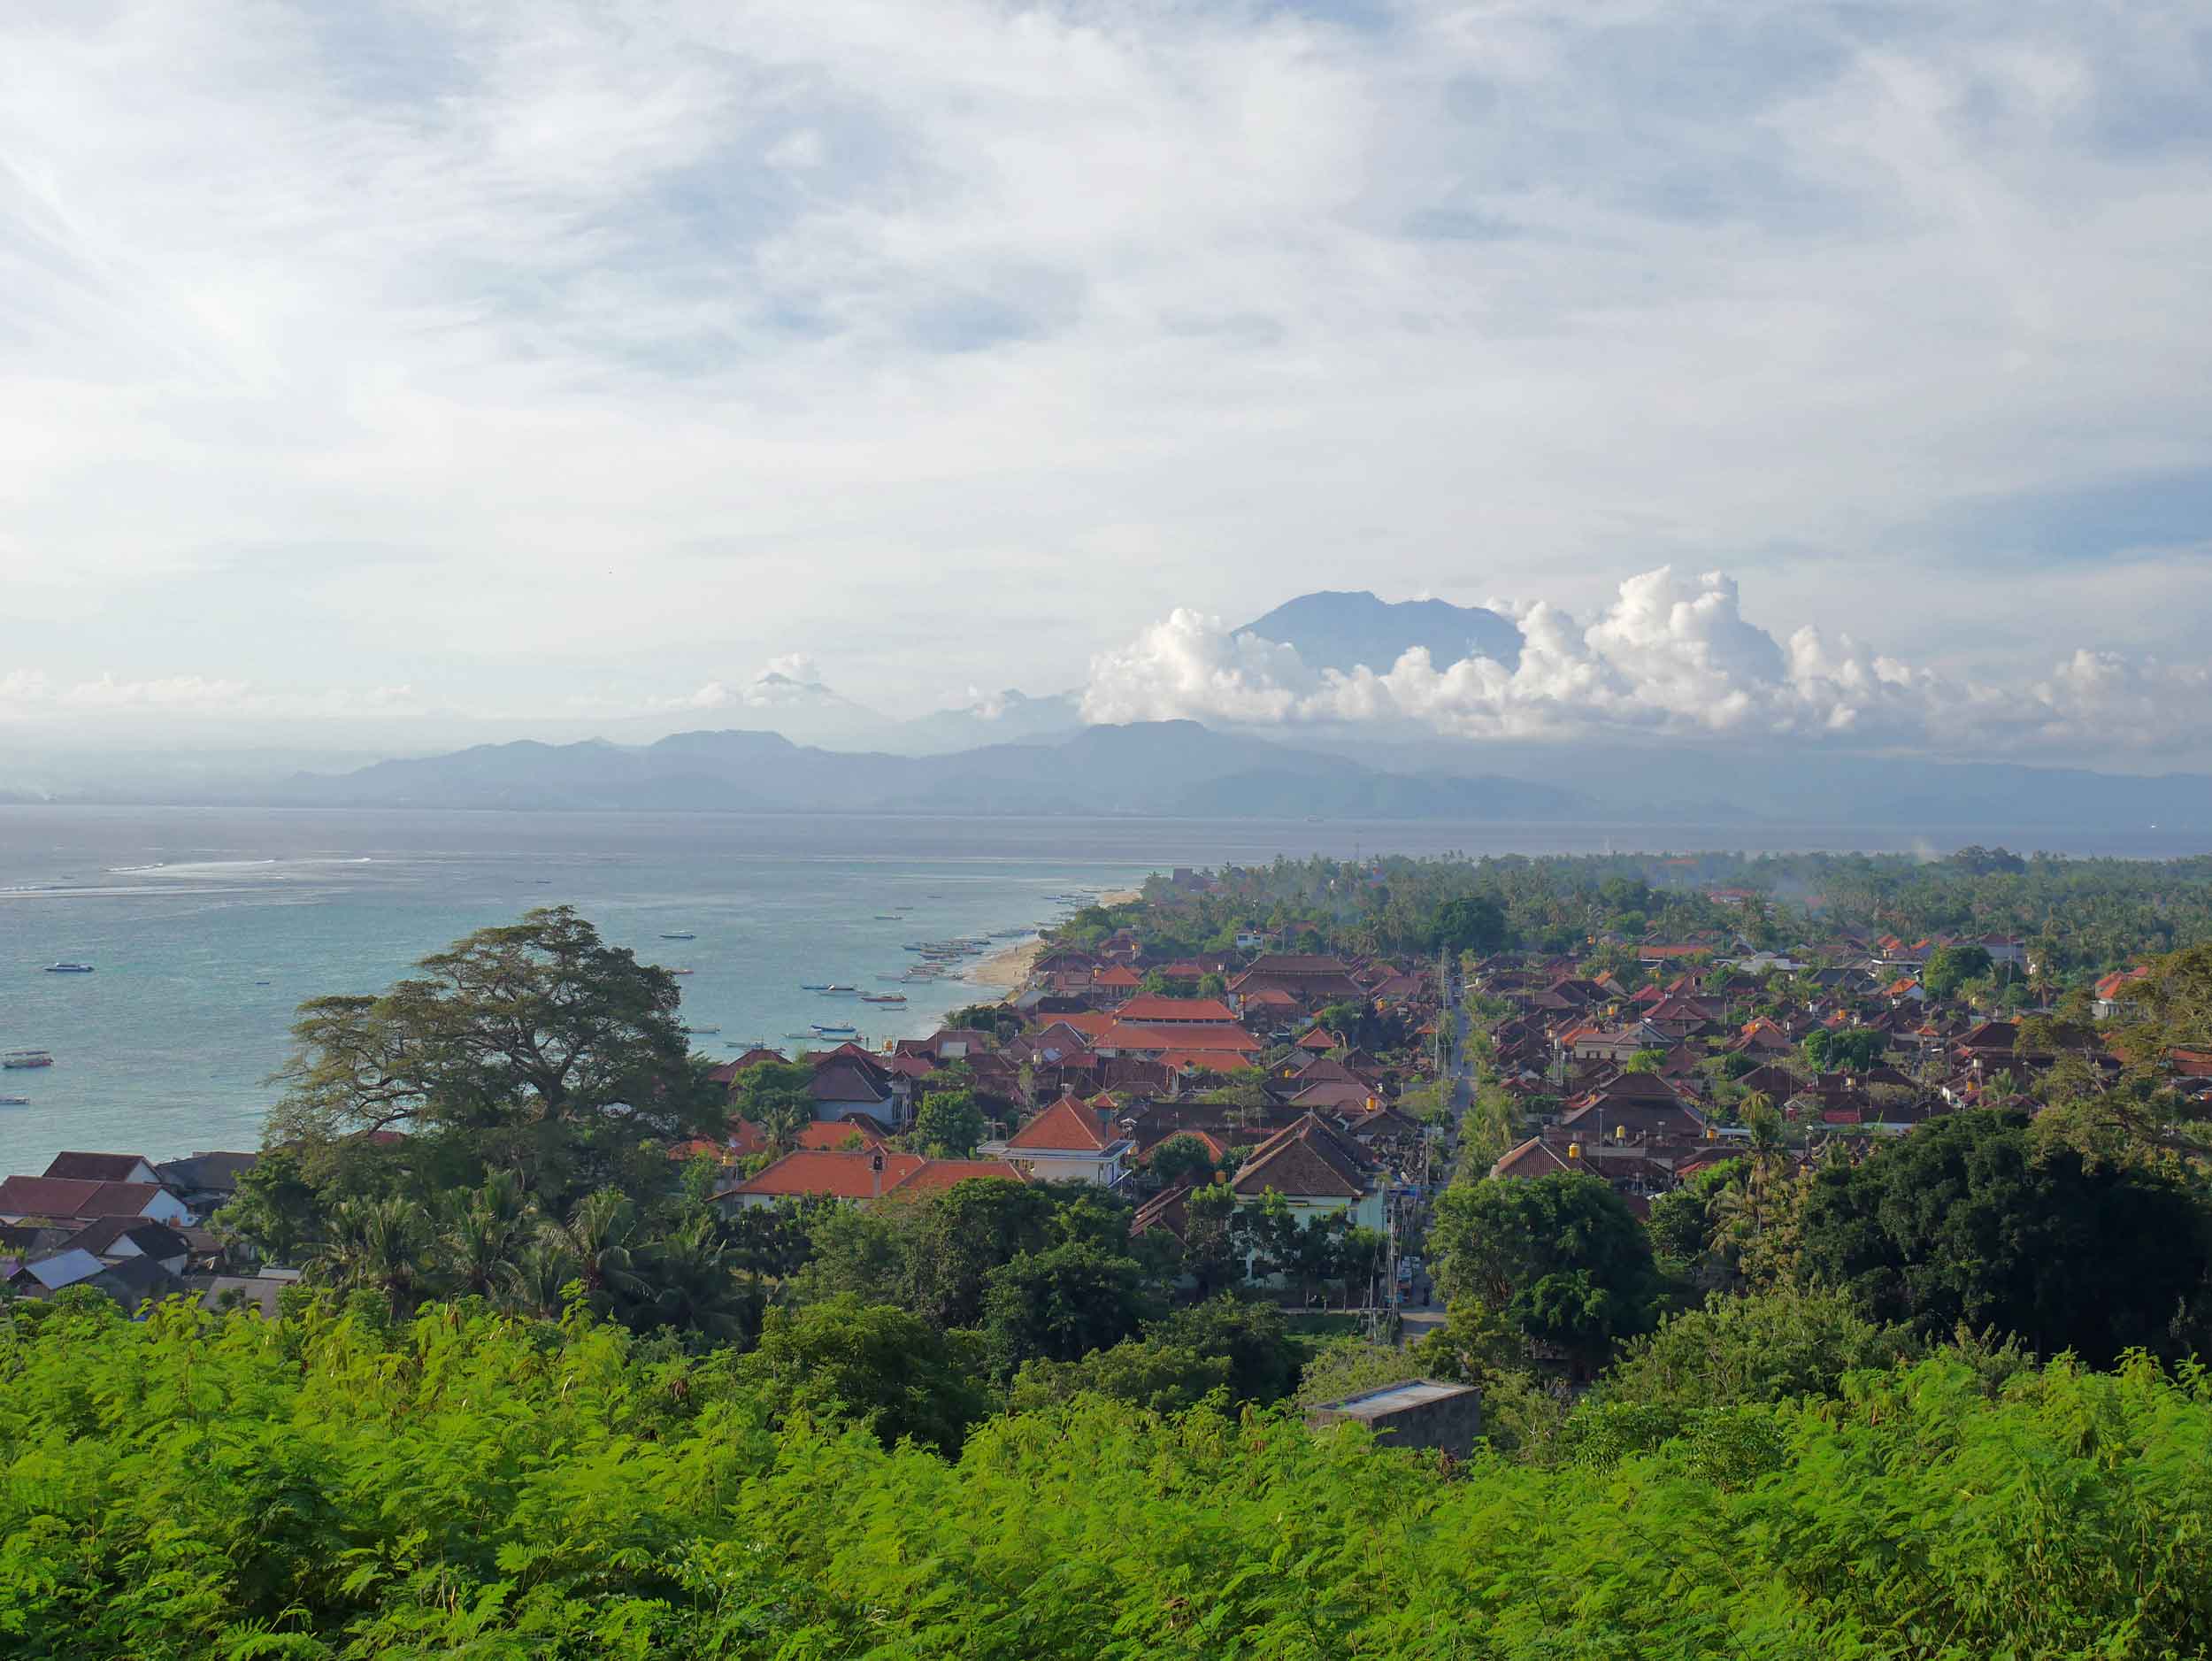  The view of Lembongan’s port town with Bali’s Mount Agung rising above the clouds in the background (May 16). 